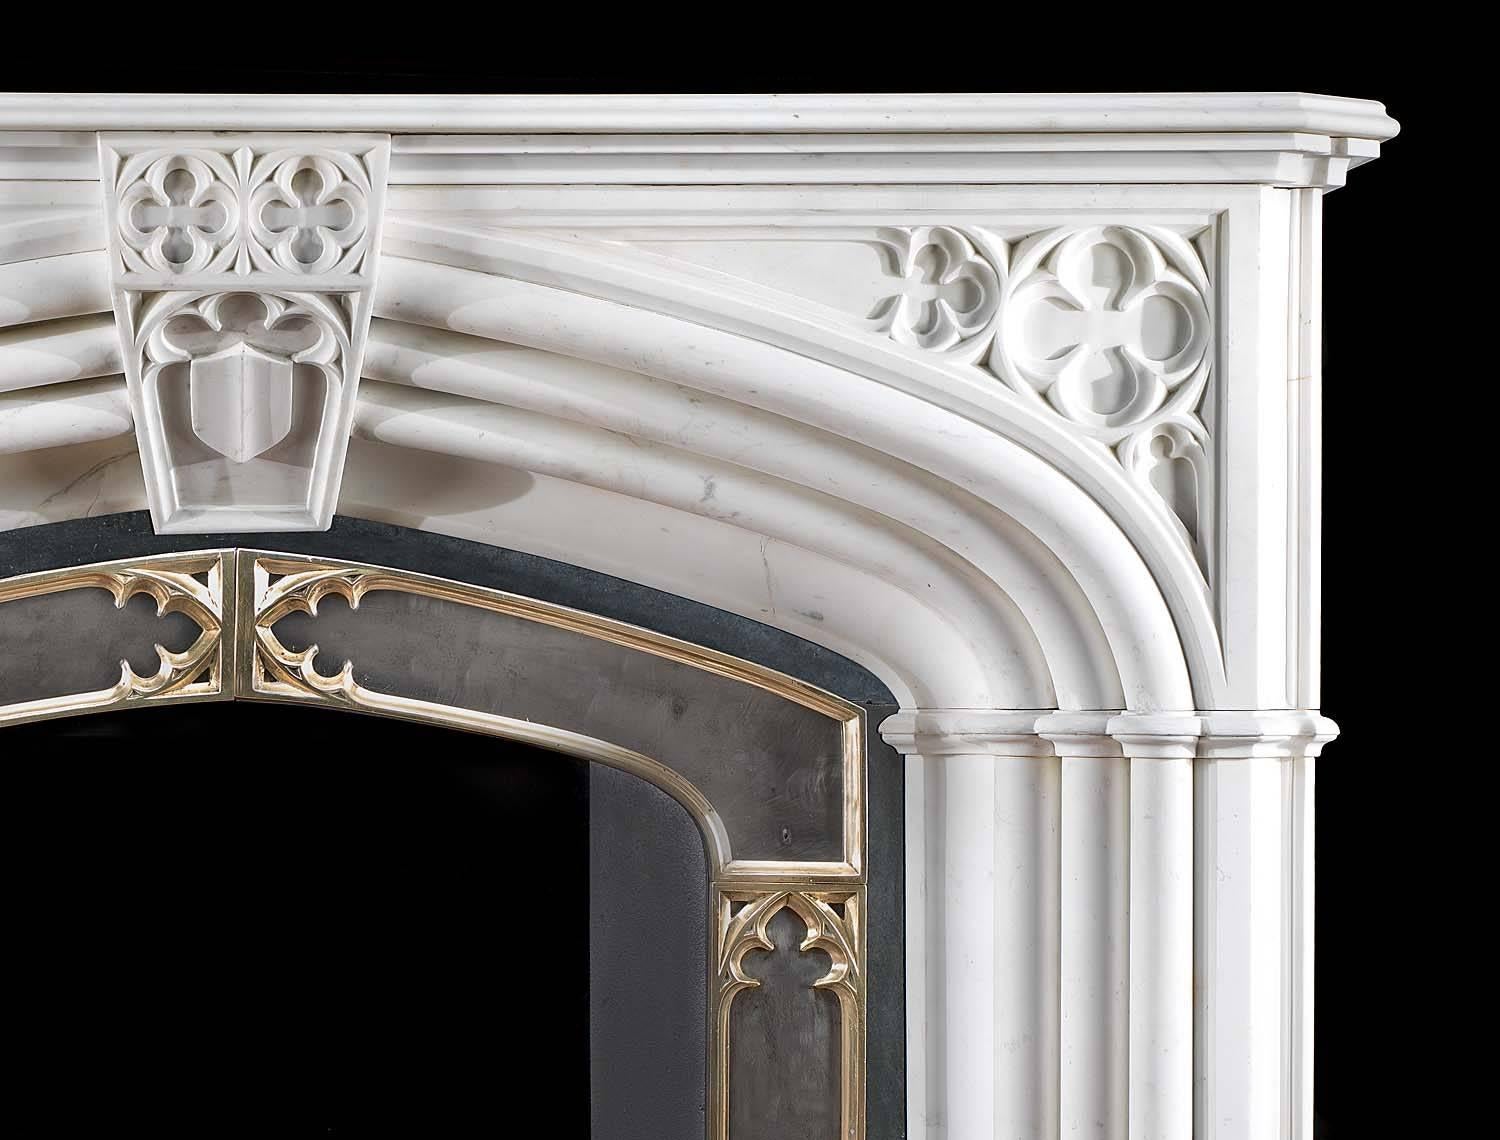 A large and imposing white statuary marble Gothic Revival chimneypiece together with it's original cast iron and brass-mounted insert. The shaped moulded shelf rests above triple columns which frame the slow arched opening and are linked by a large